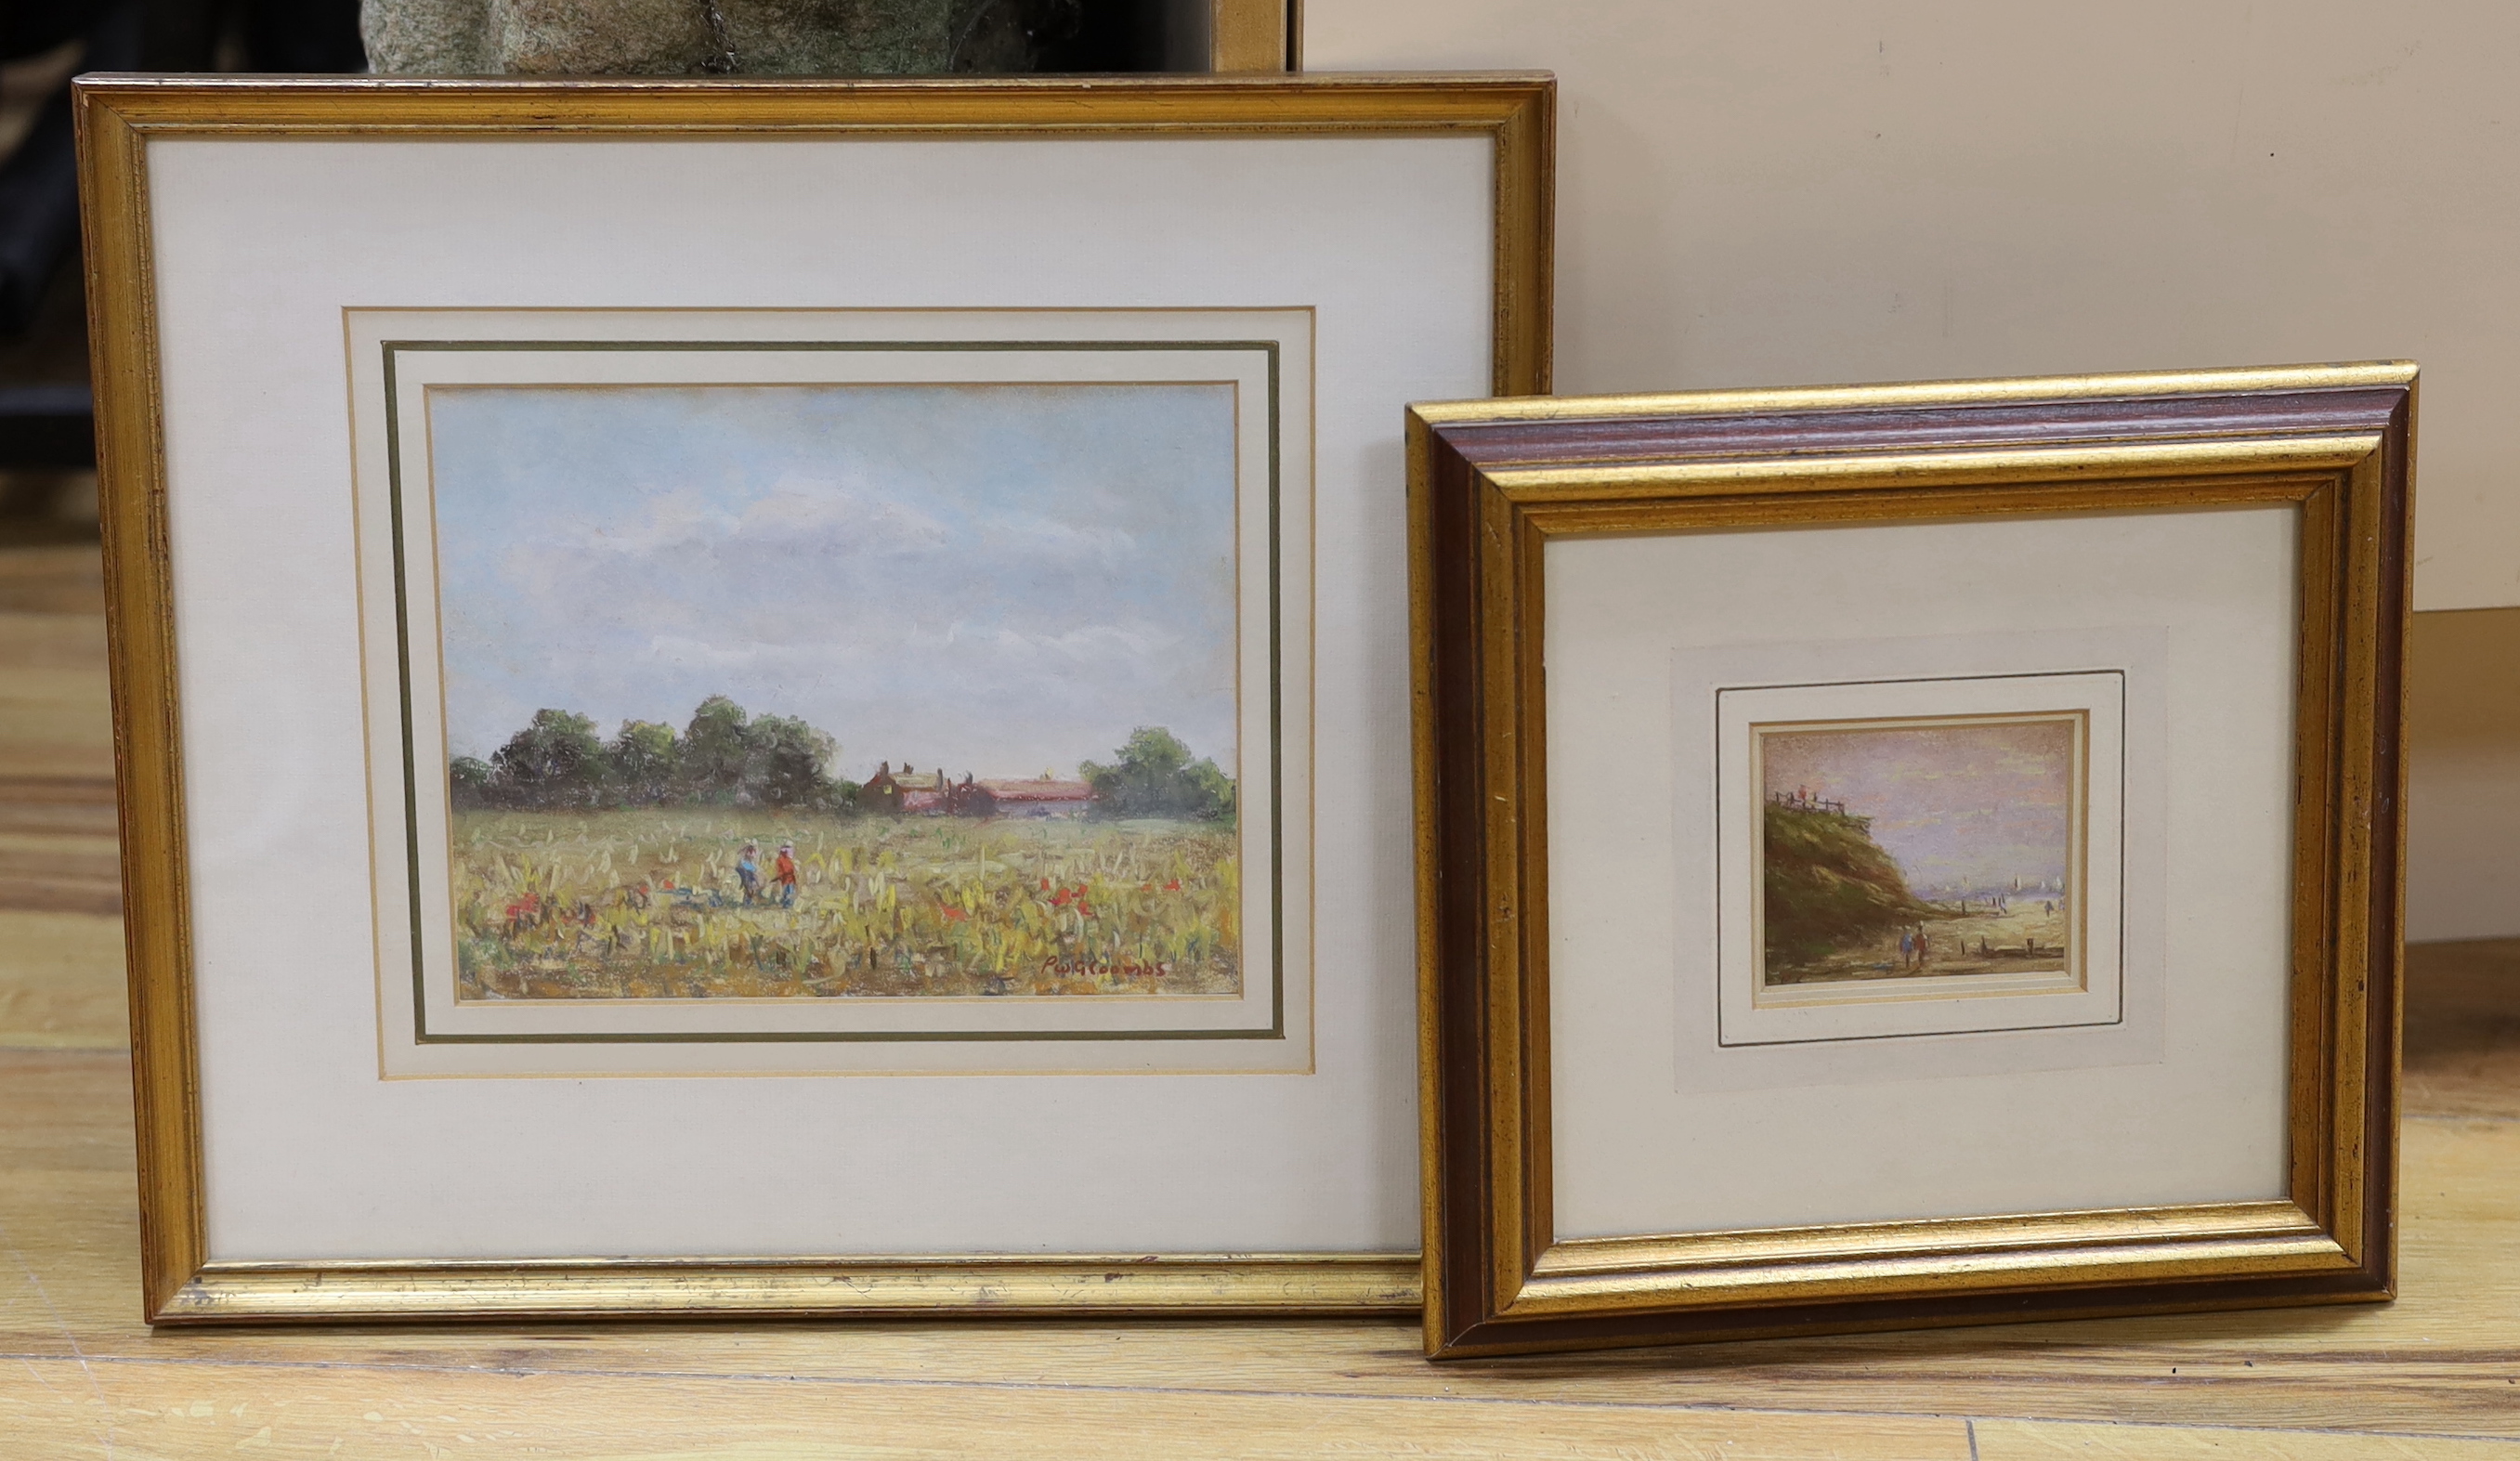 Peter Coombs (1929-2007) two pastels, ‘Compton Beach’ and ‘A Day Out’, signed, details verso, largest 15 x 19cm